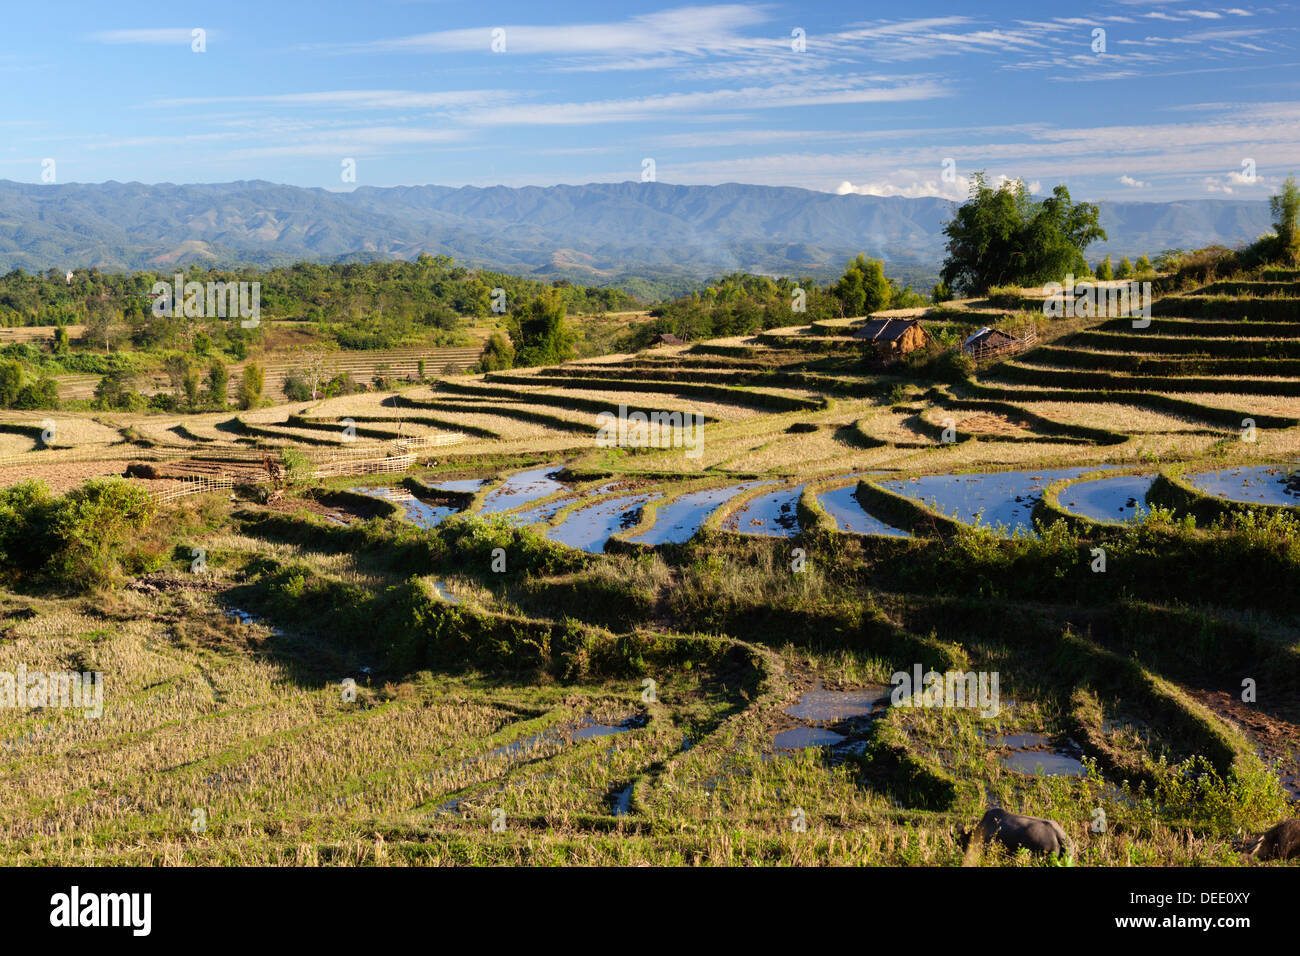 Terraced rice fields and Shan hills, near Kengtung, Shan State, Myanmar (Burma), Asia Stock Photo